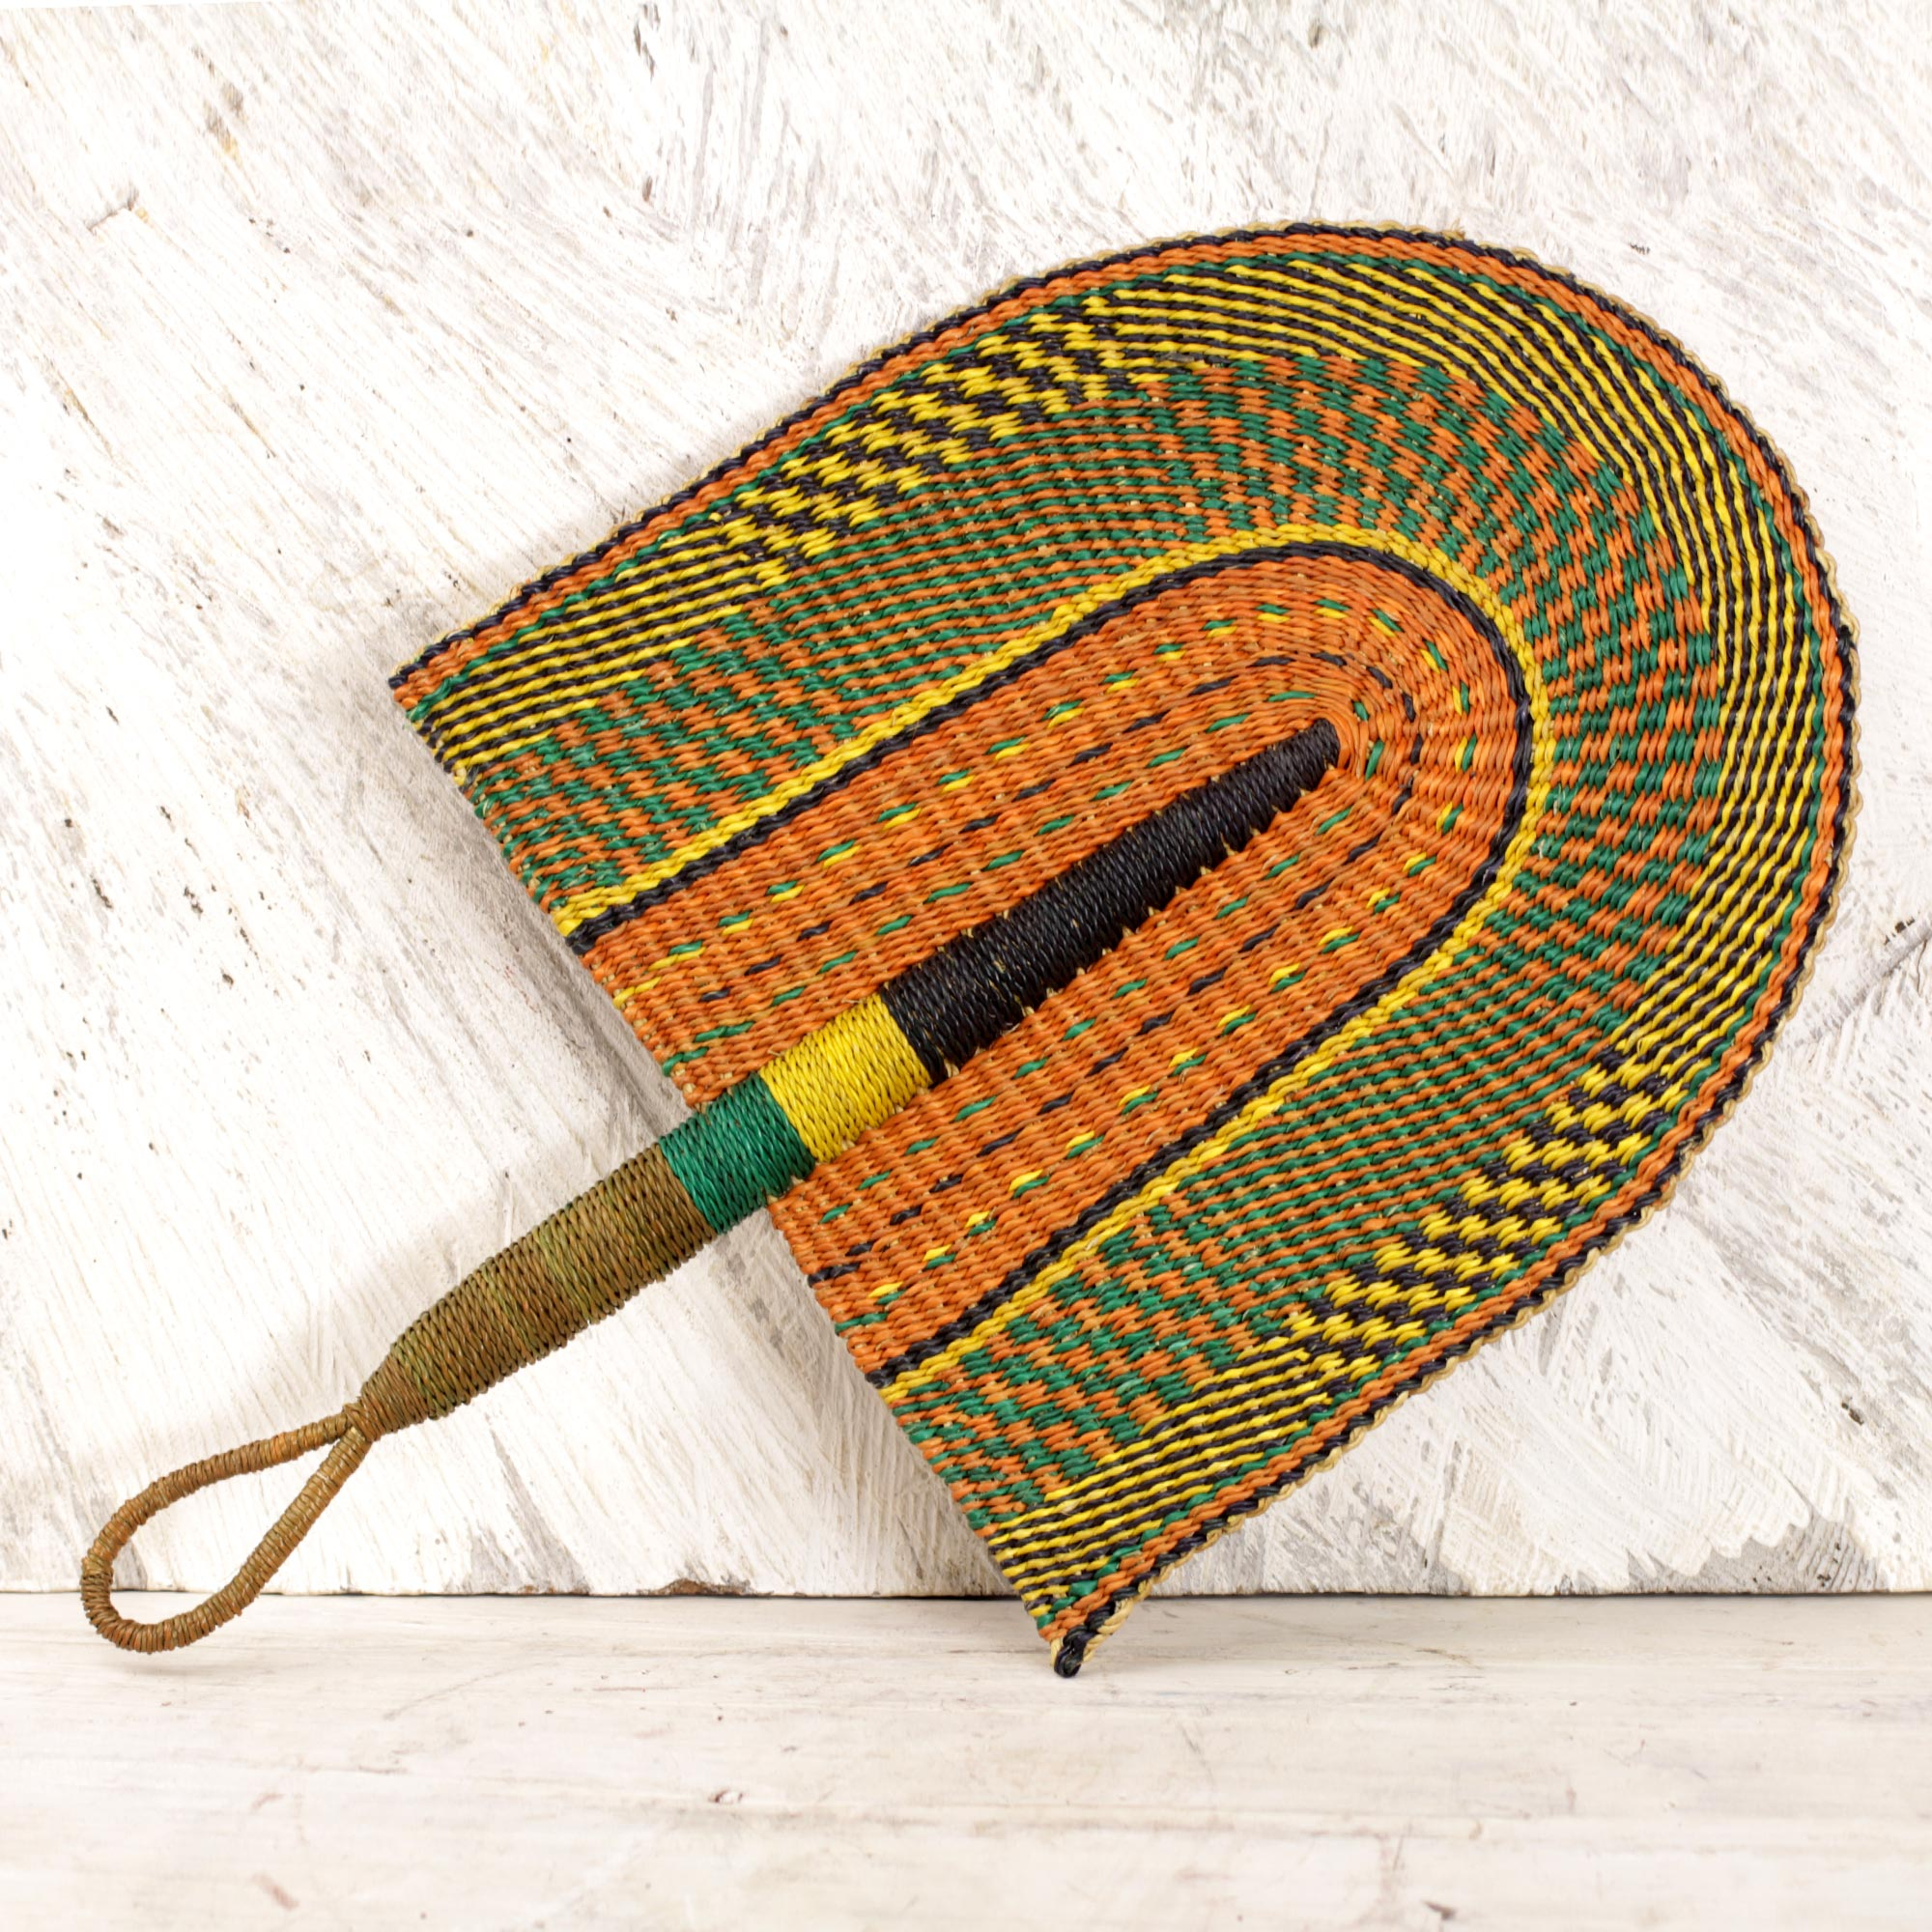 Wedding Summer Home decor African Woven Baskets Hand Held Fan Multi-Colored 